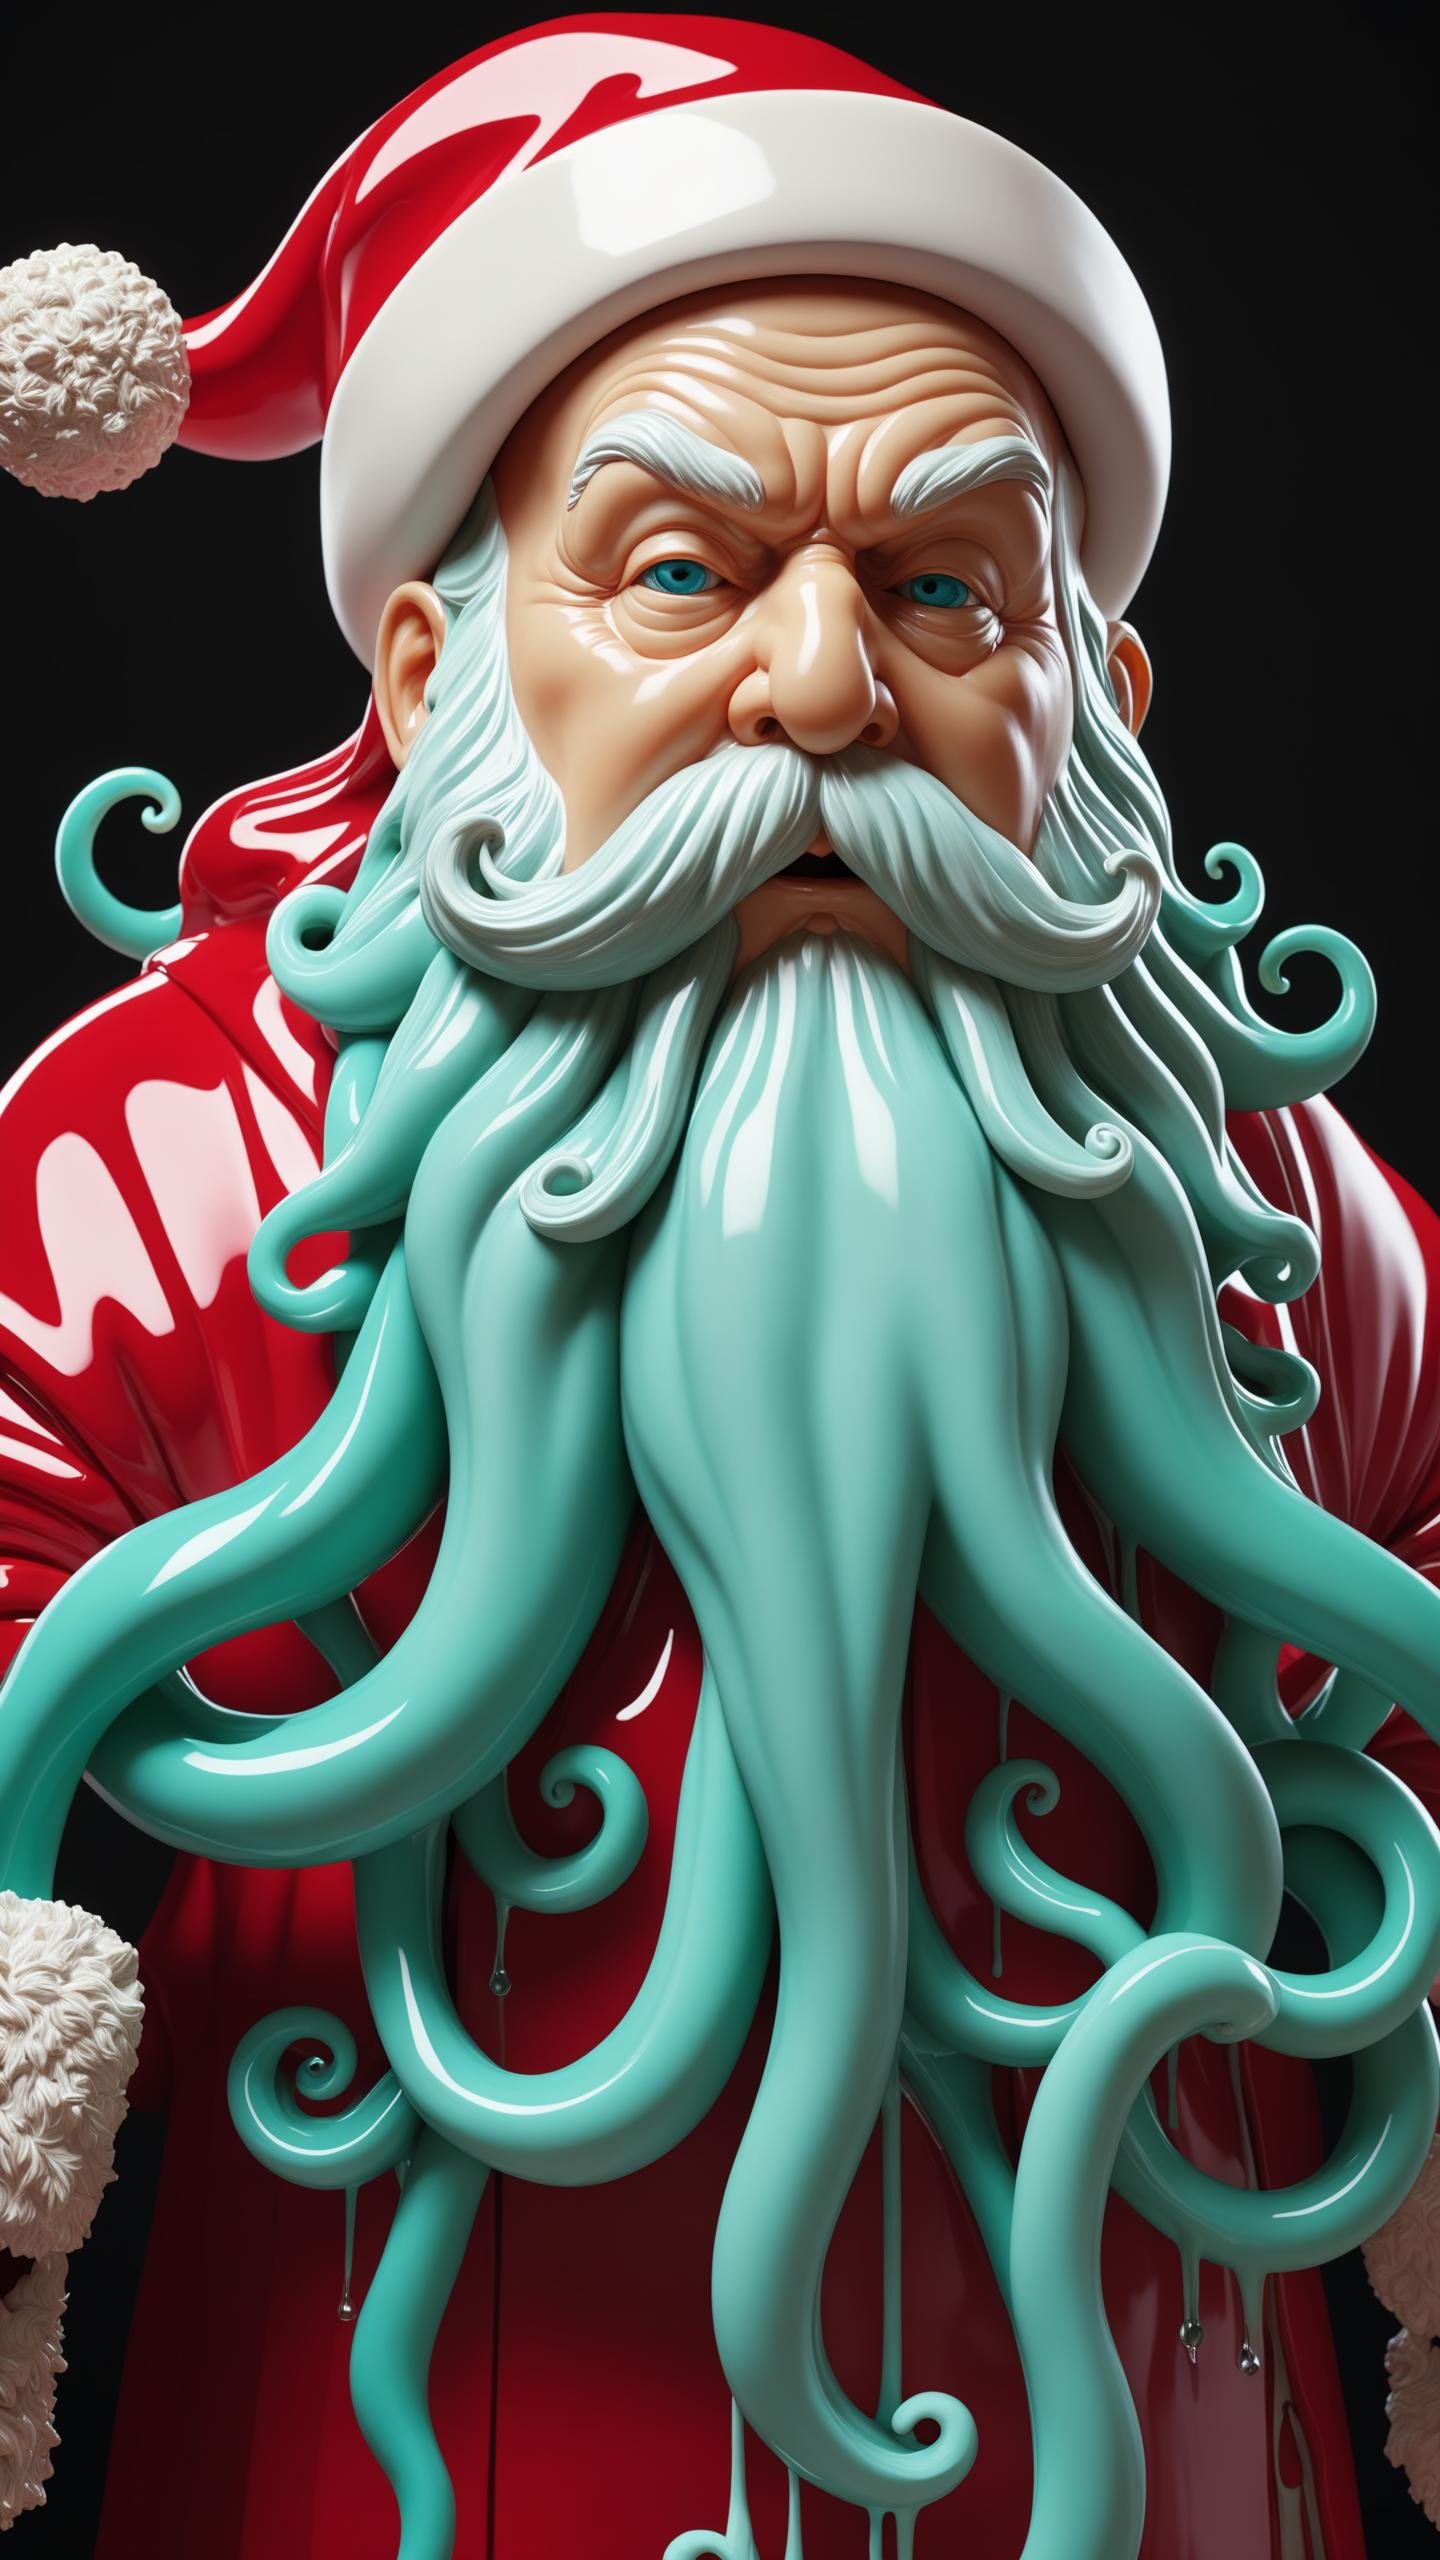 8k hyper realistic sculpture of (melting santa claus) (cthulhu:0.9) by alberto seveso nychos beatrix potter, wet and extremely glossy polycarbonate, highly detailed, vibrant, intricate accurate details, cinematic color grading, cinematic, artstation, Golden ratio, volumetric lighting, film grain, Fujifilm Neopan 100, Low shutter